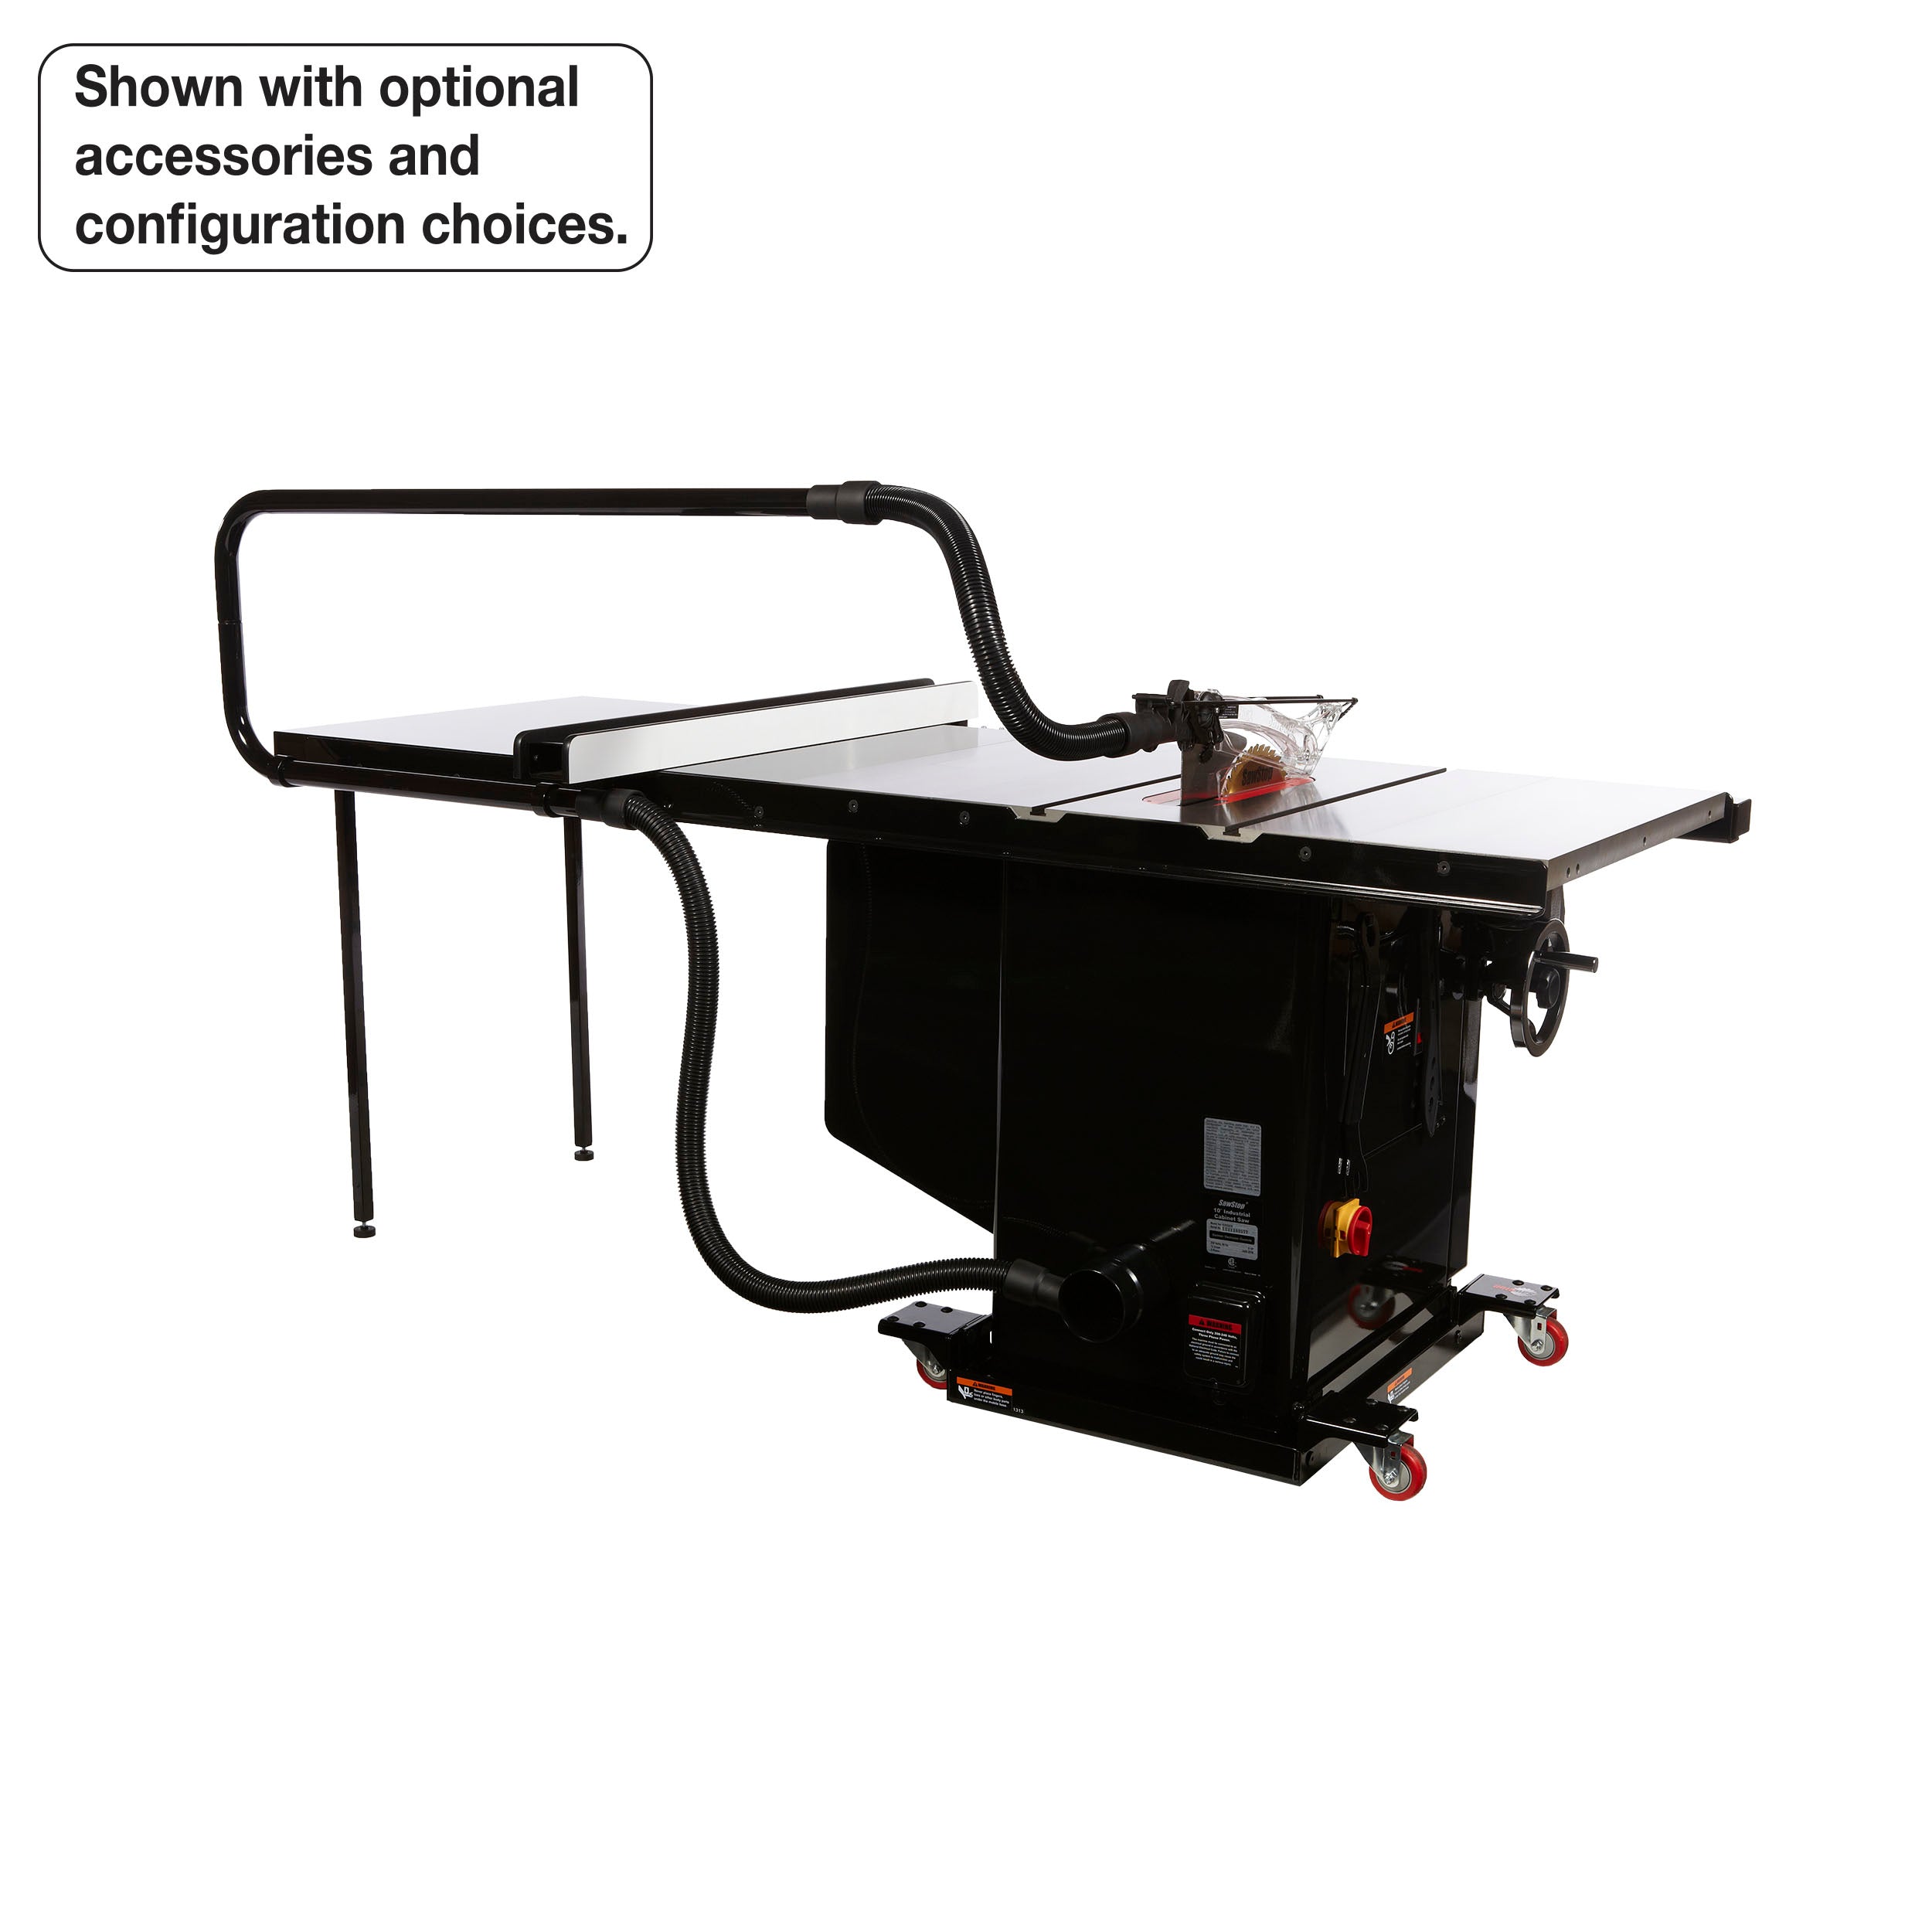 SawStop 5HP, 3ph, 230v Industrial Cabinet Saw w/ 52